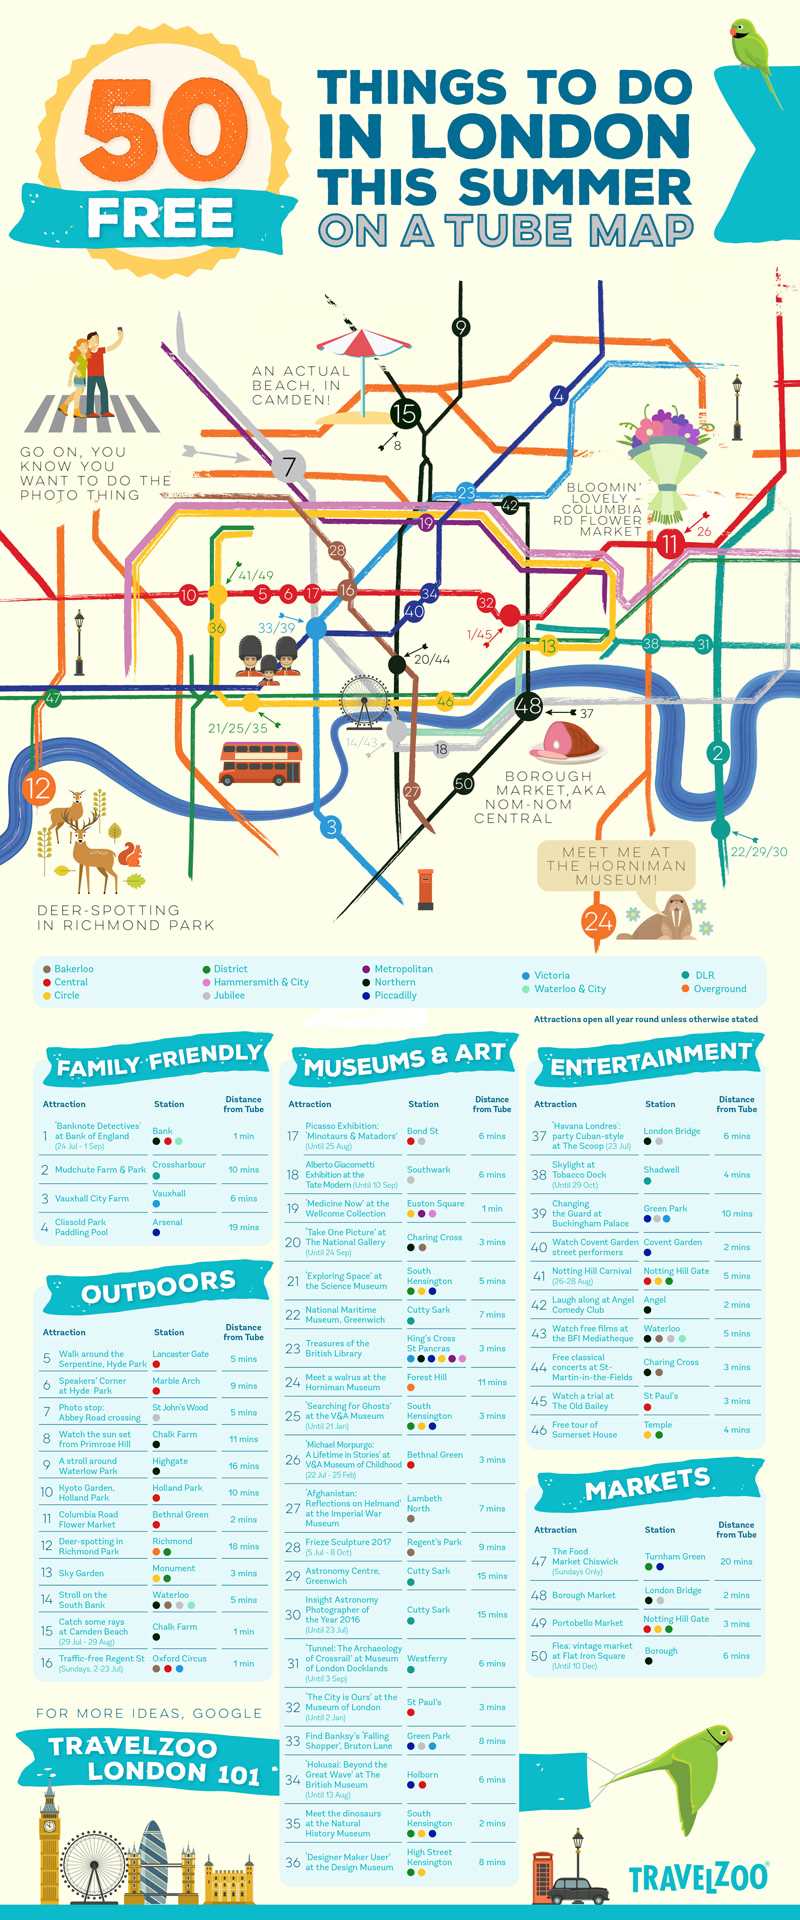 50 Free Things To Do In London This Summer On A Tube Map Travelzoo